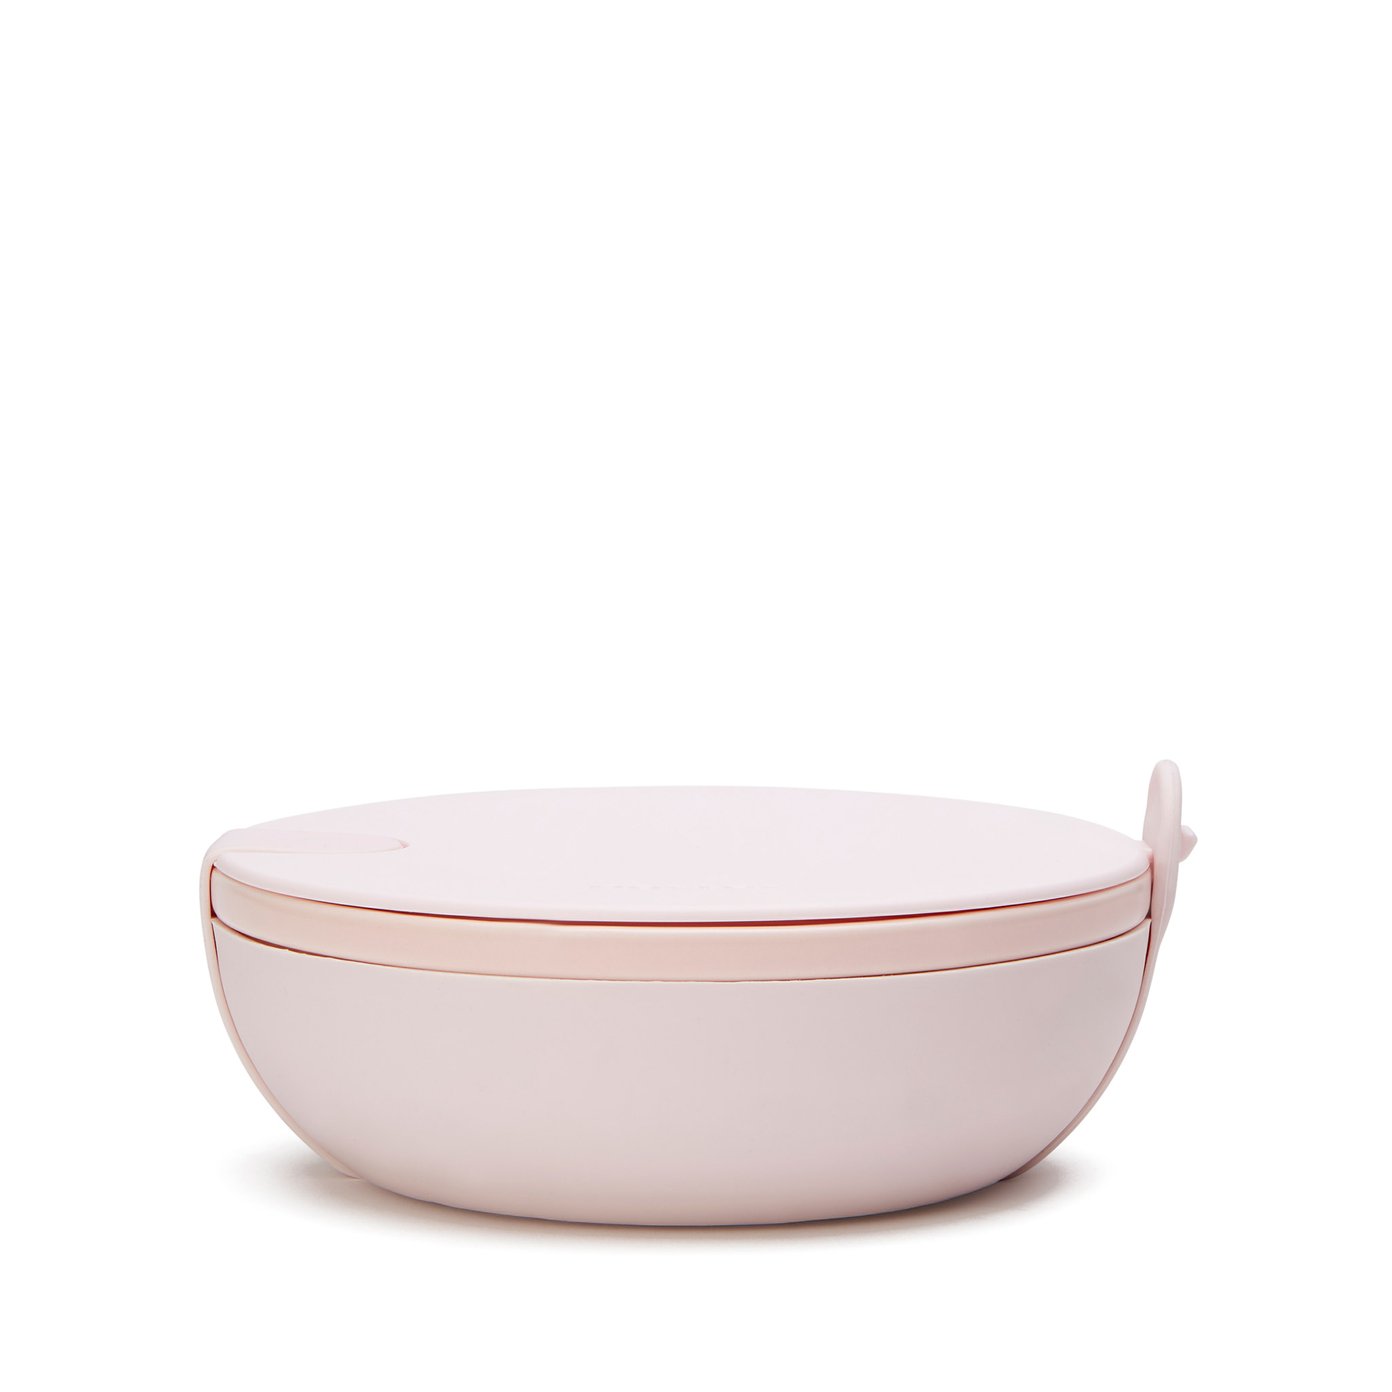  W&P Porter Ceramic Bowl Lunch Container w/ Protective